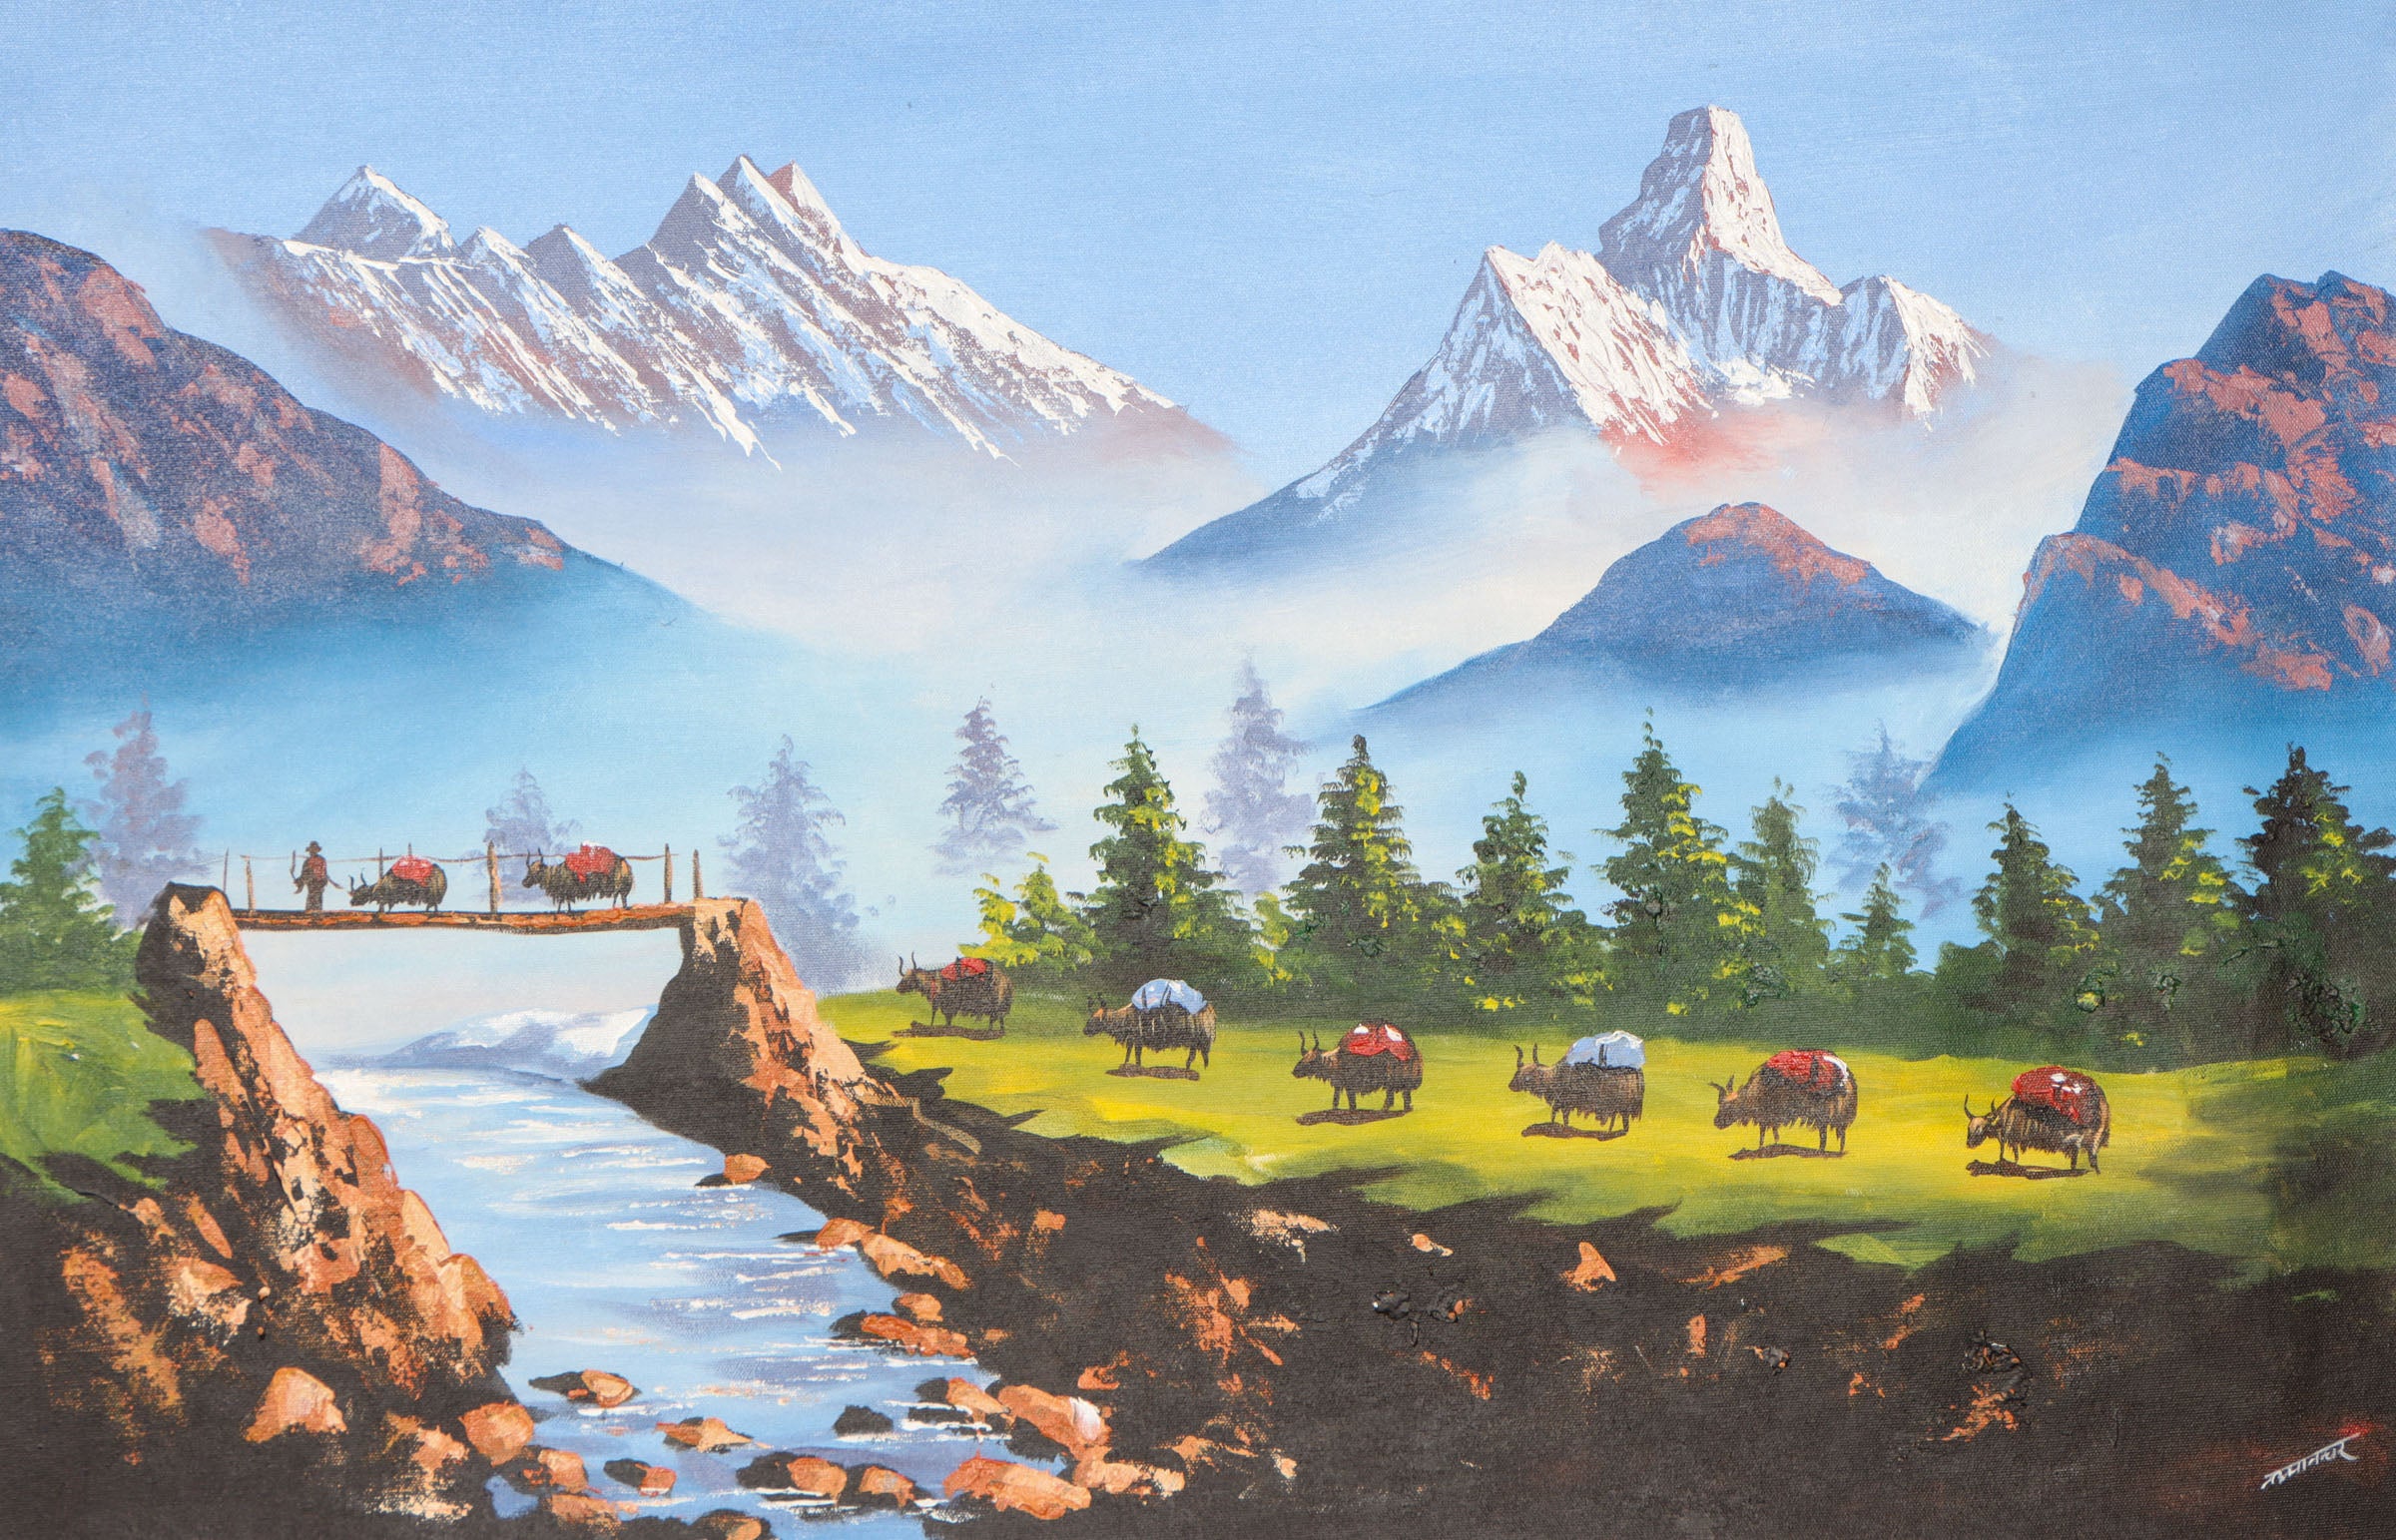 Oil Painting of Mount Everest with Beautiful Landscape of Yak grazing - Handpainted Art